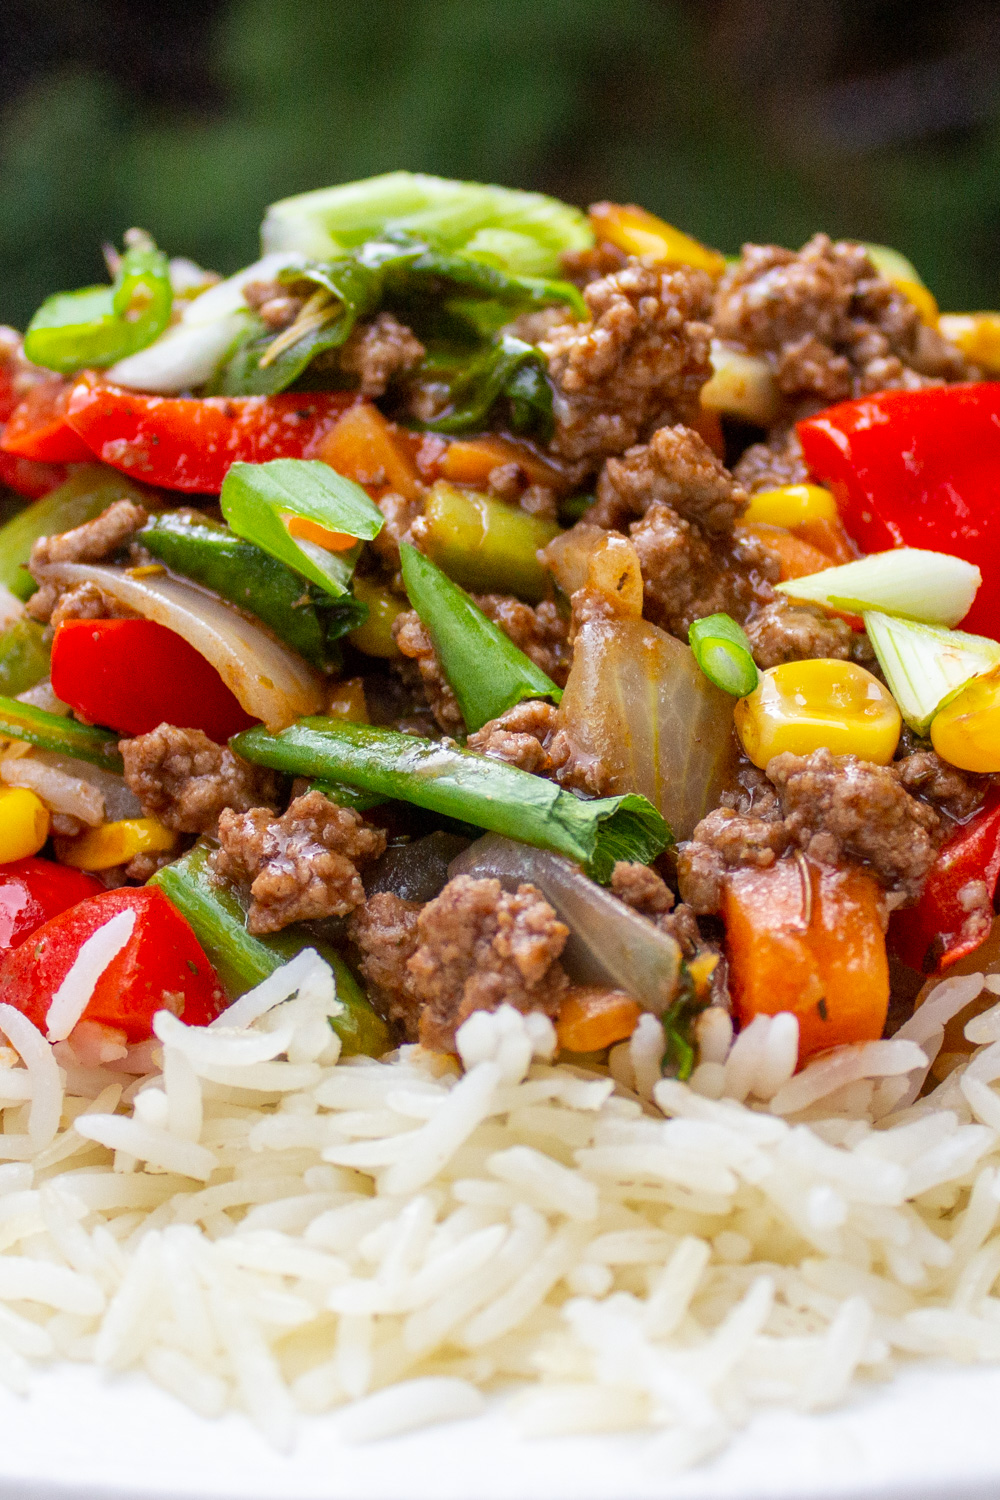 stir fry ground beef and vegetables over white rice on plate.